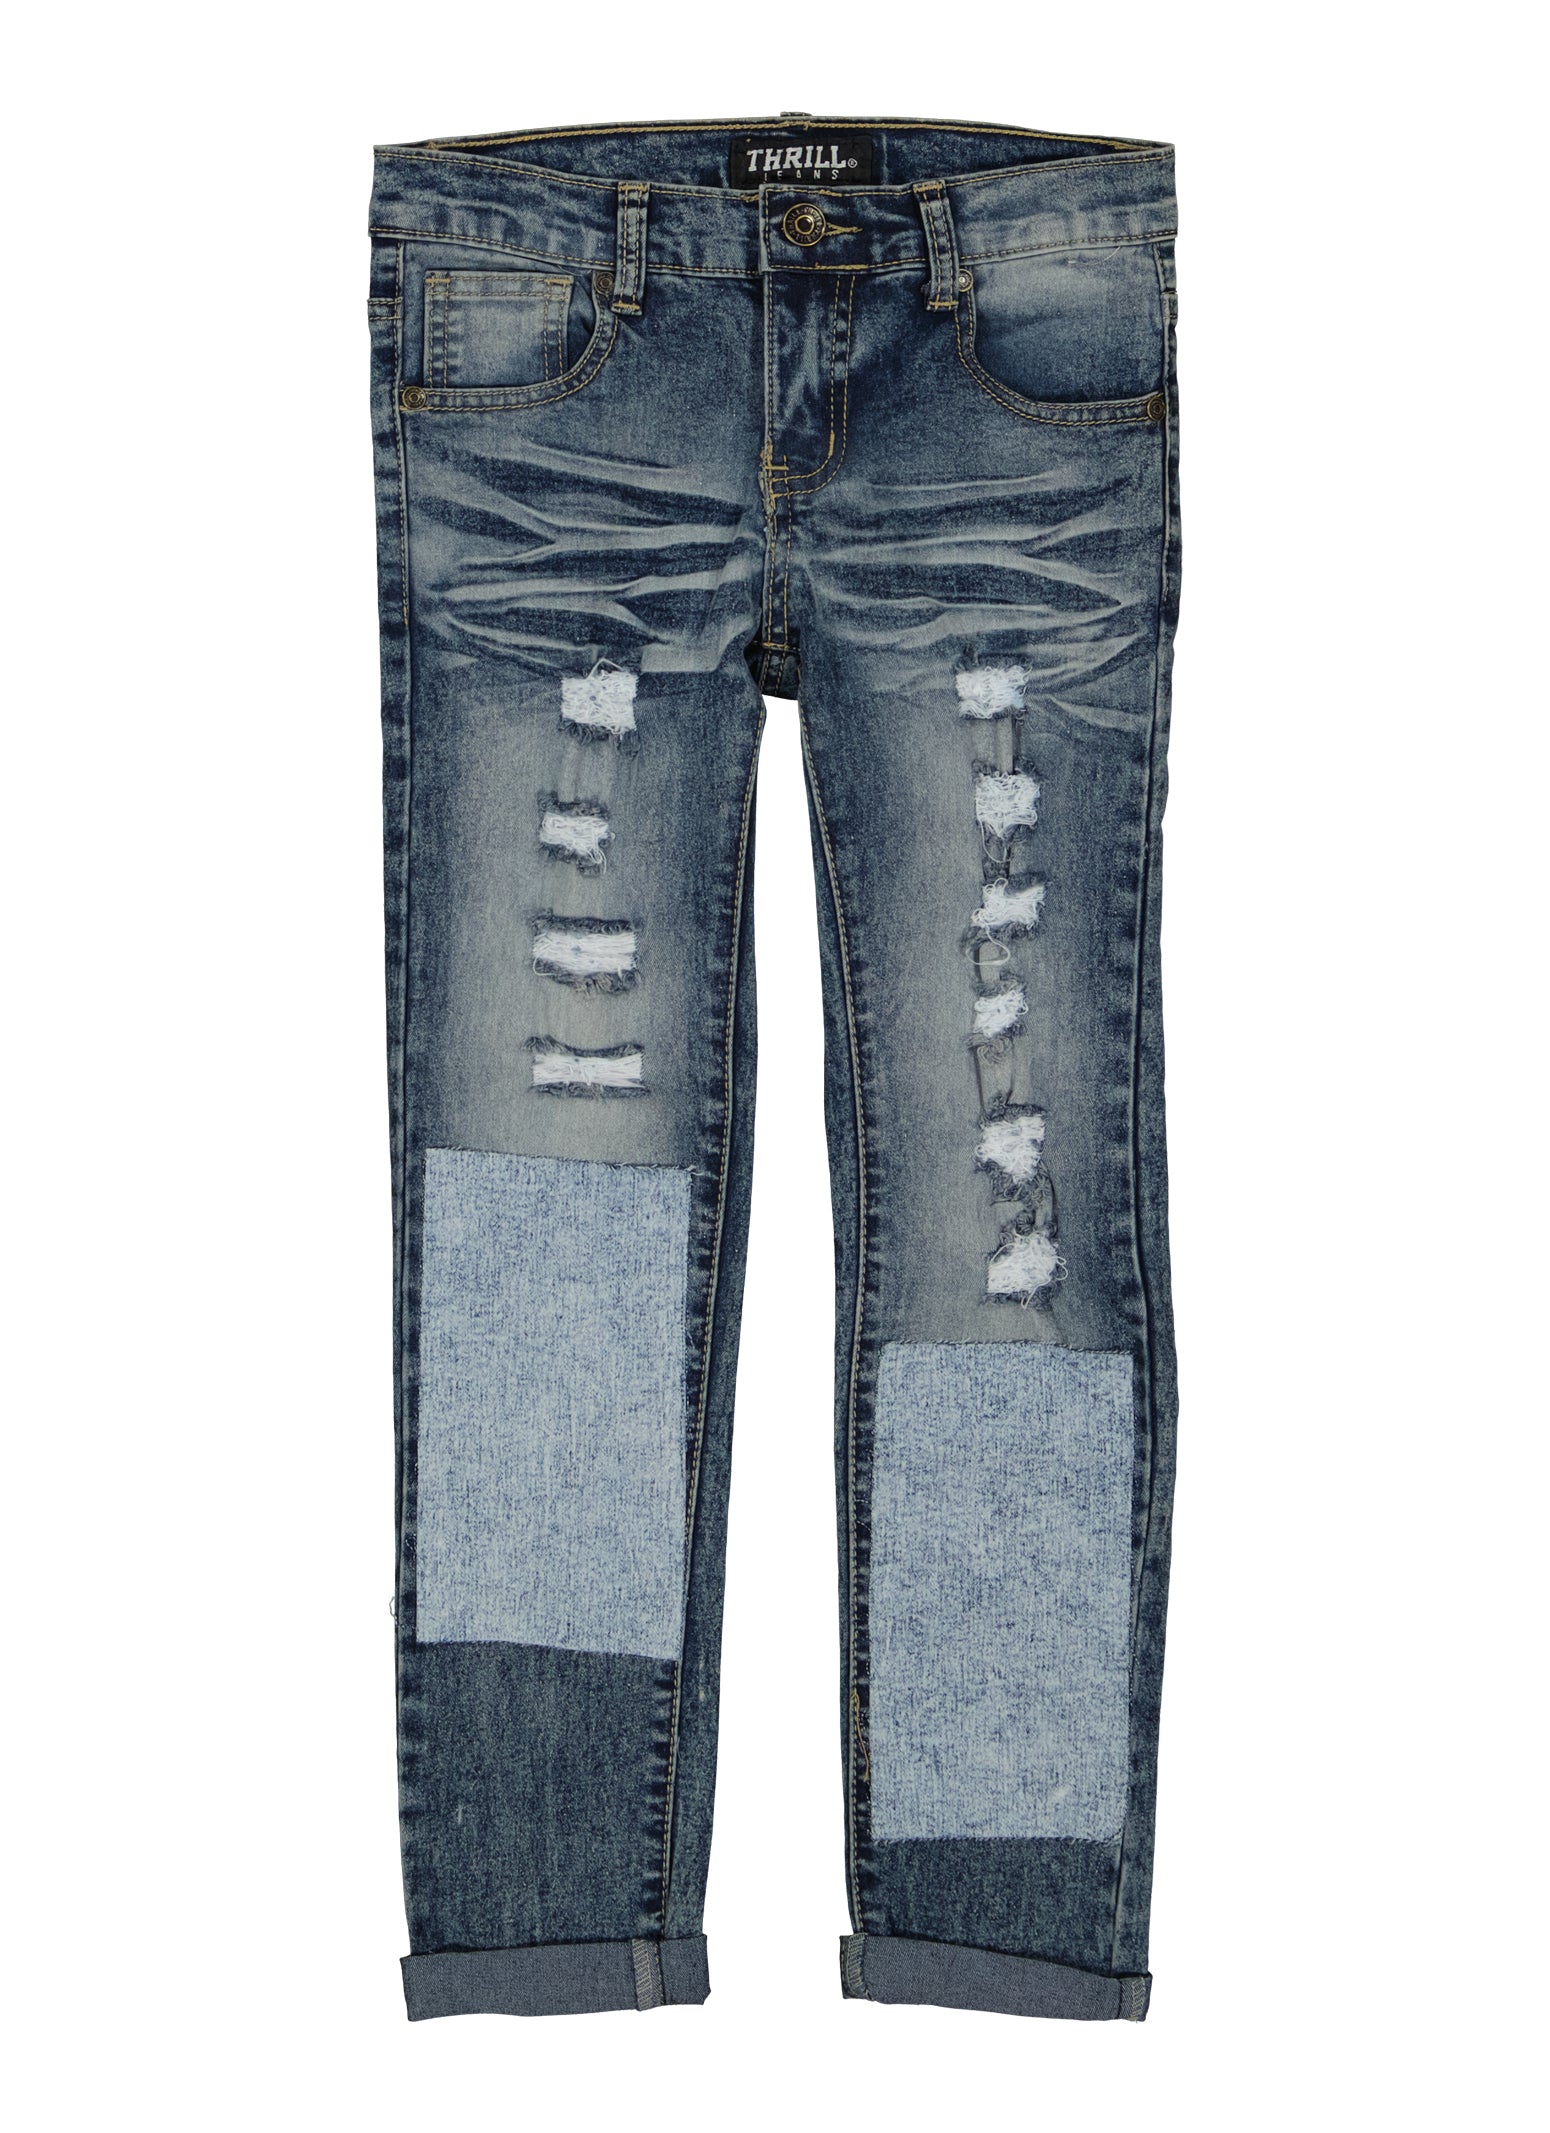 Girls Distressed Patchwork Jeans, Blue, Size 12